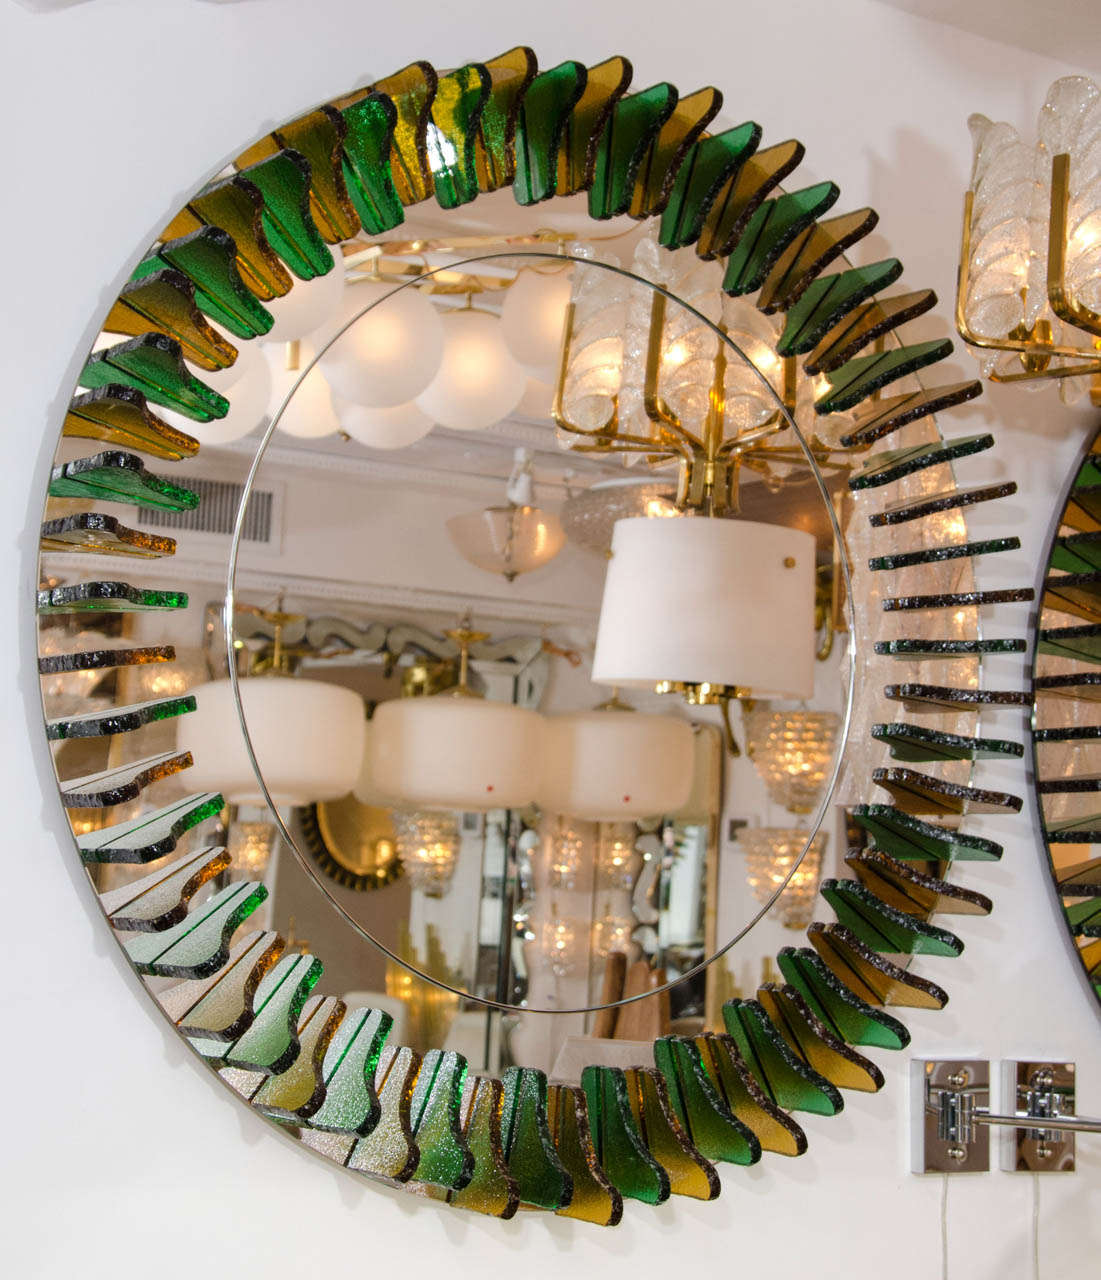 Large girasole style mirror with alternating green and amber glass fragment surround.